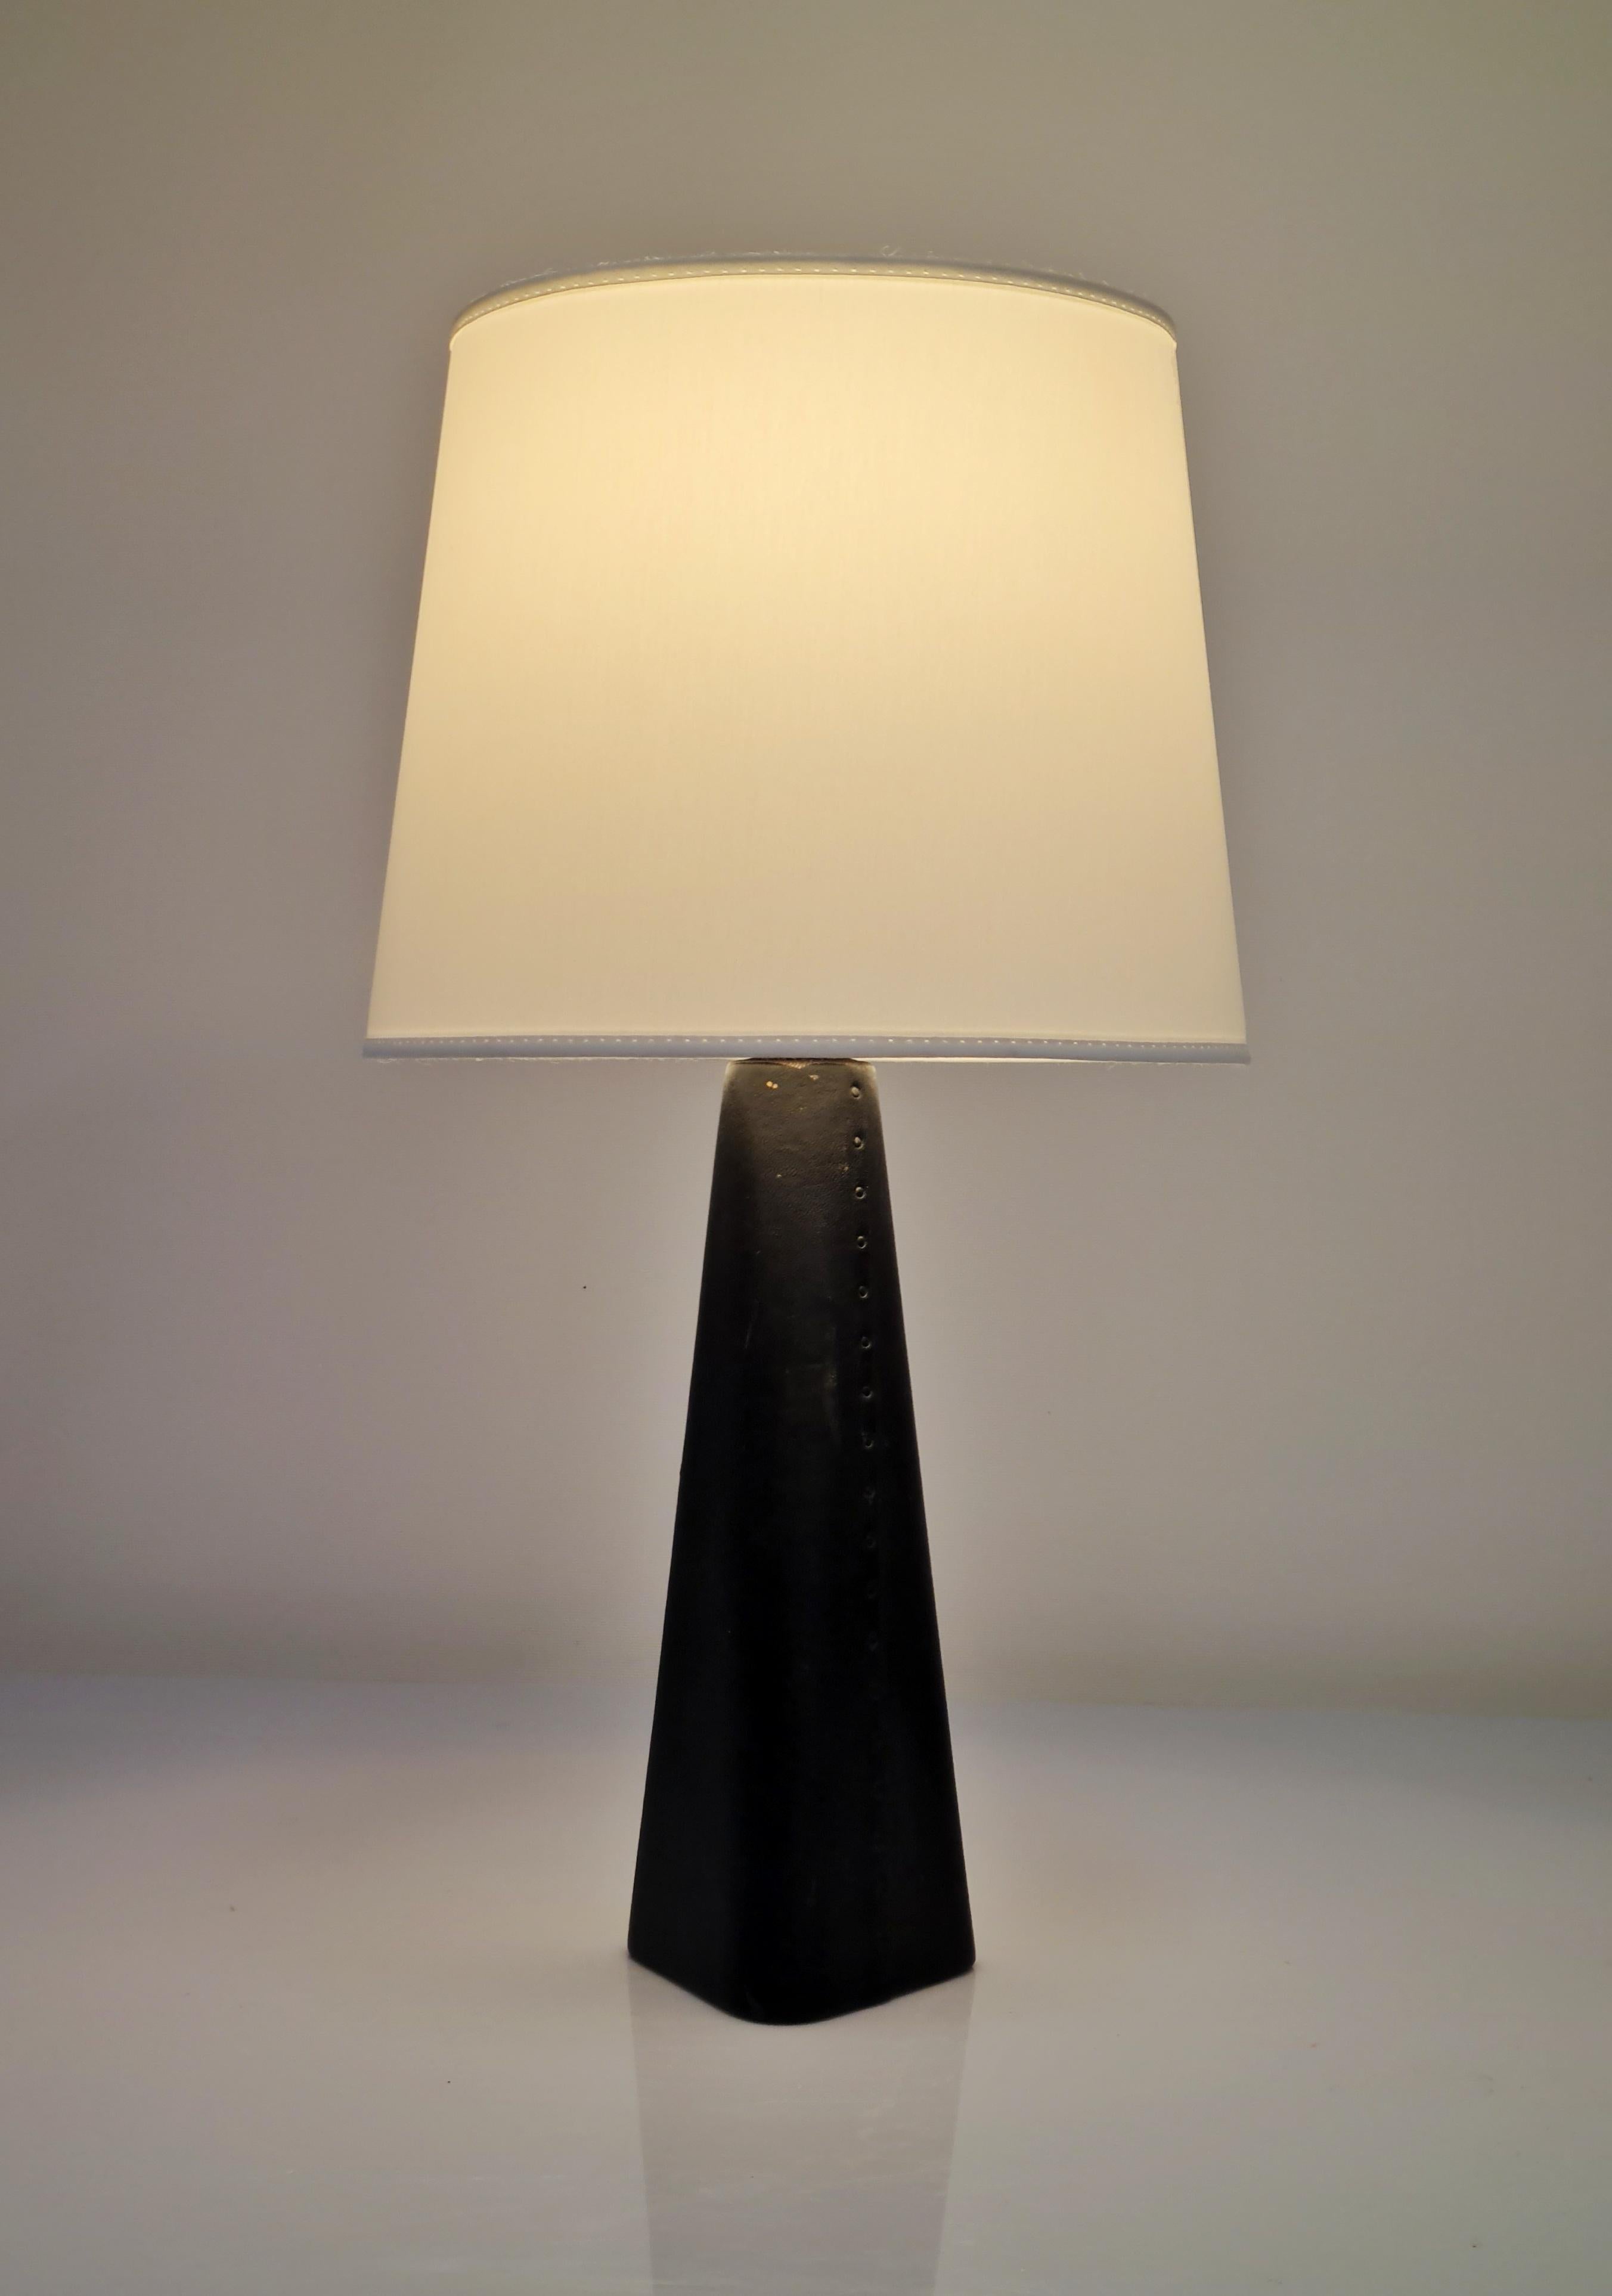 Scandinavian Modern Lisa Johansson-Papé Table Lamp 46-186 LJP in Leather and Silk, Orno For Sale